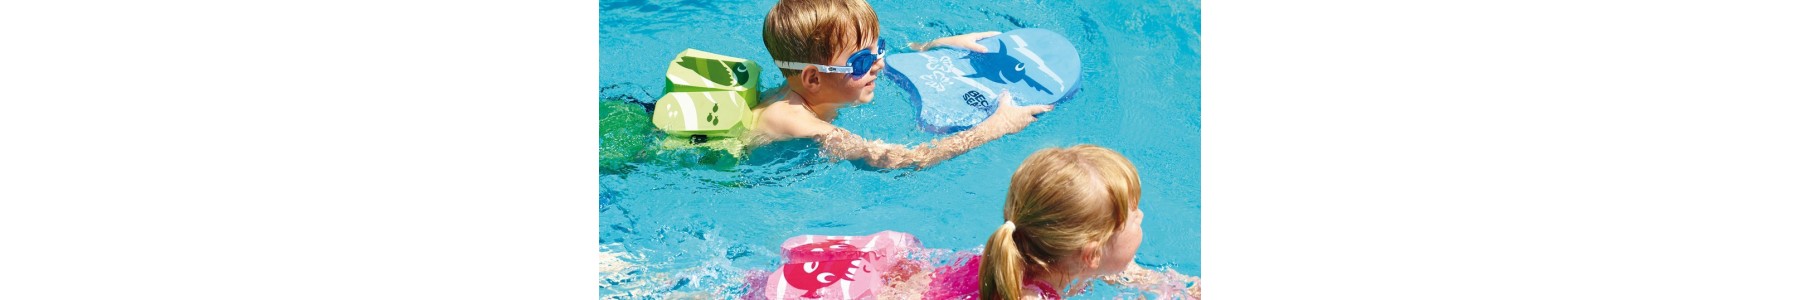 Swimming for disabled children Useful for play and therapy